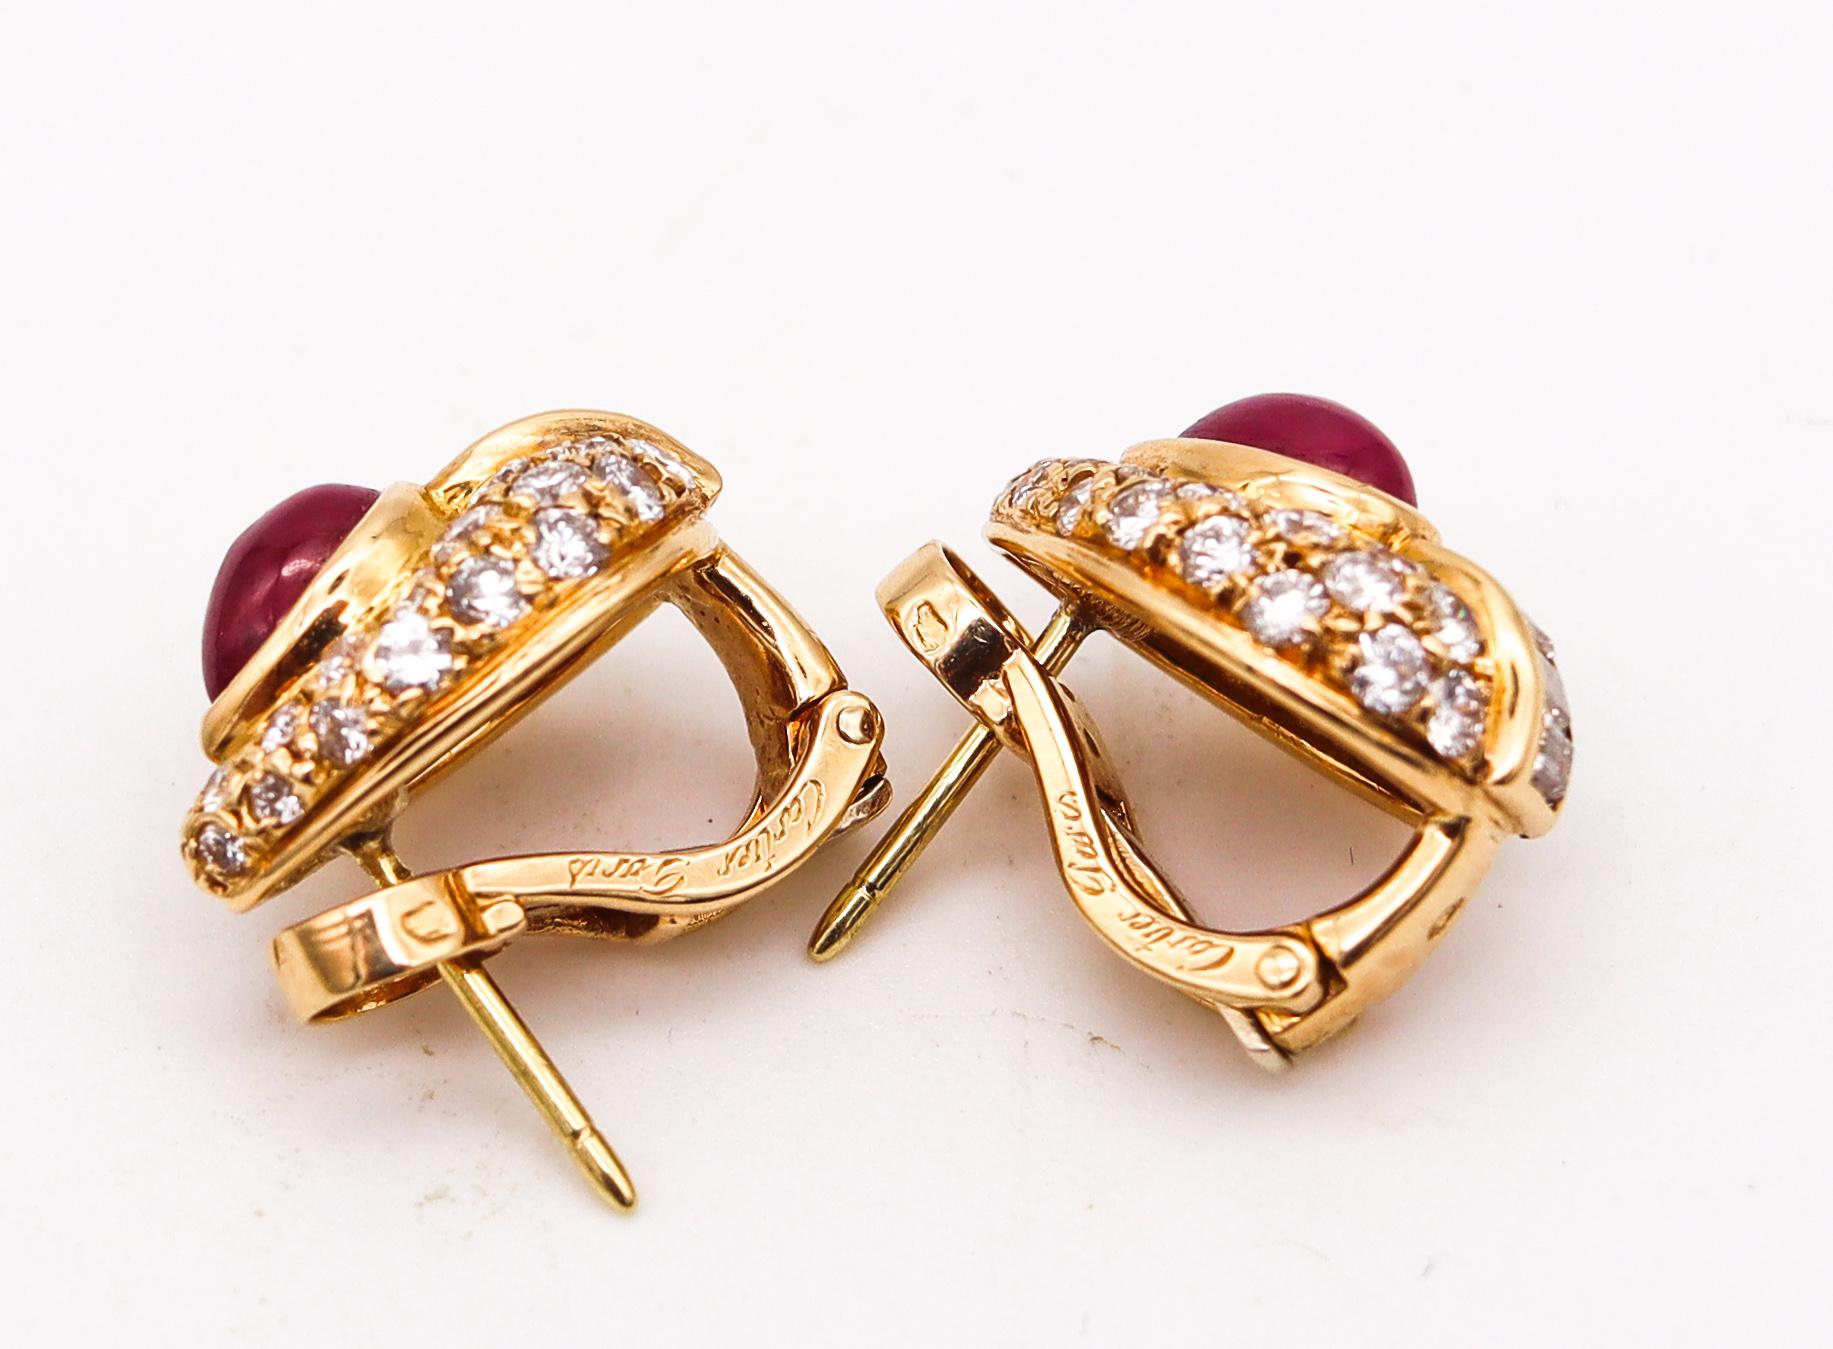 Cartier George L'enfant Earrings 18Kt Gold 5.44 Cts of Burmese Rubies & Diamonds In Excellent Condition For Sale In Miami, FL